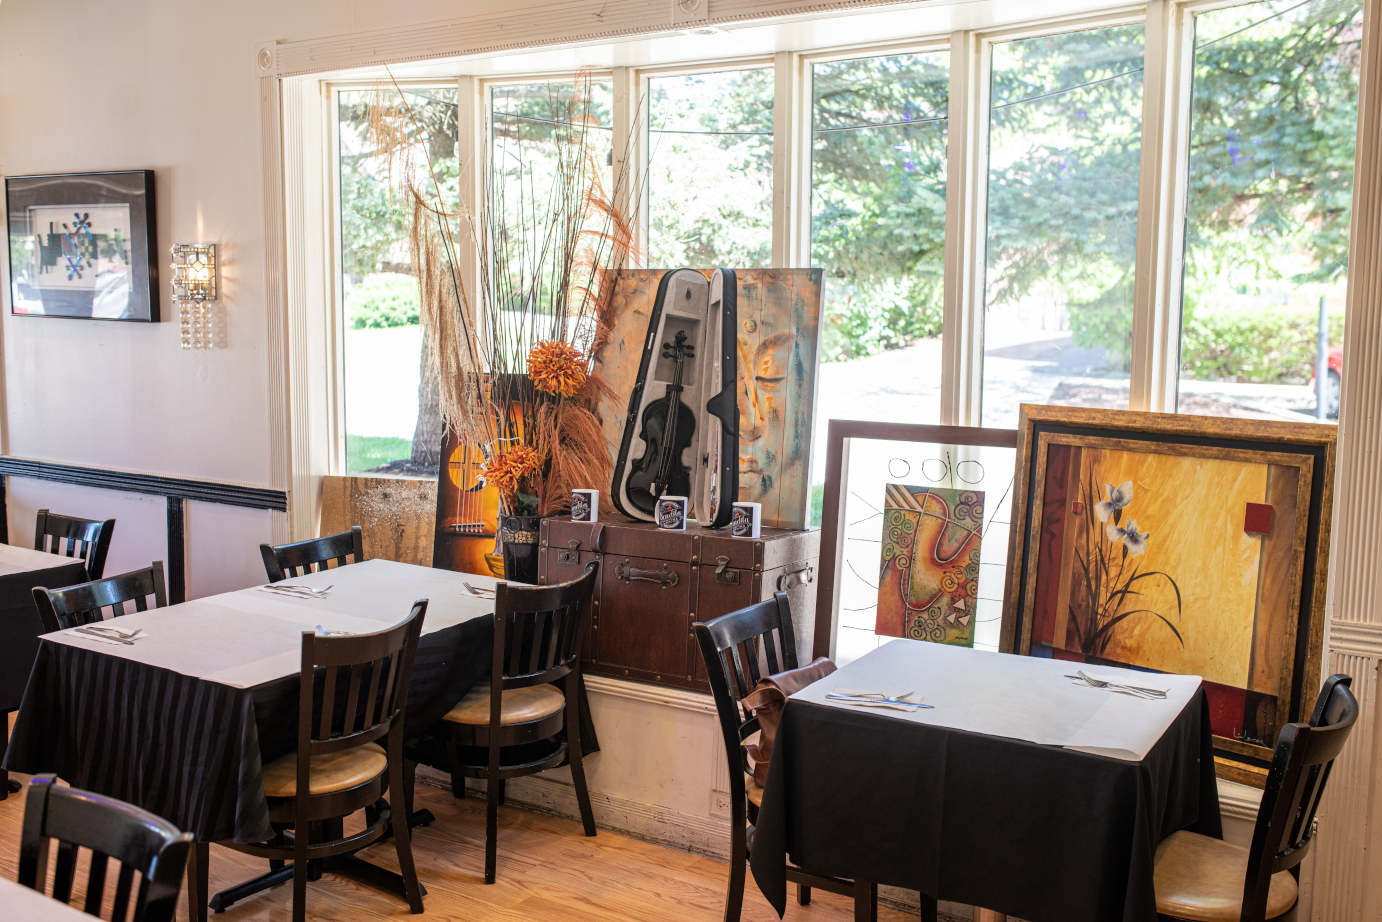 Interior, tables and seats, artworks and decorations leaned against a window